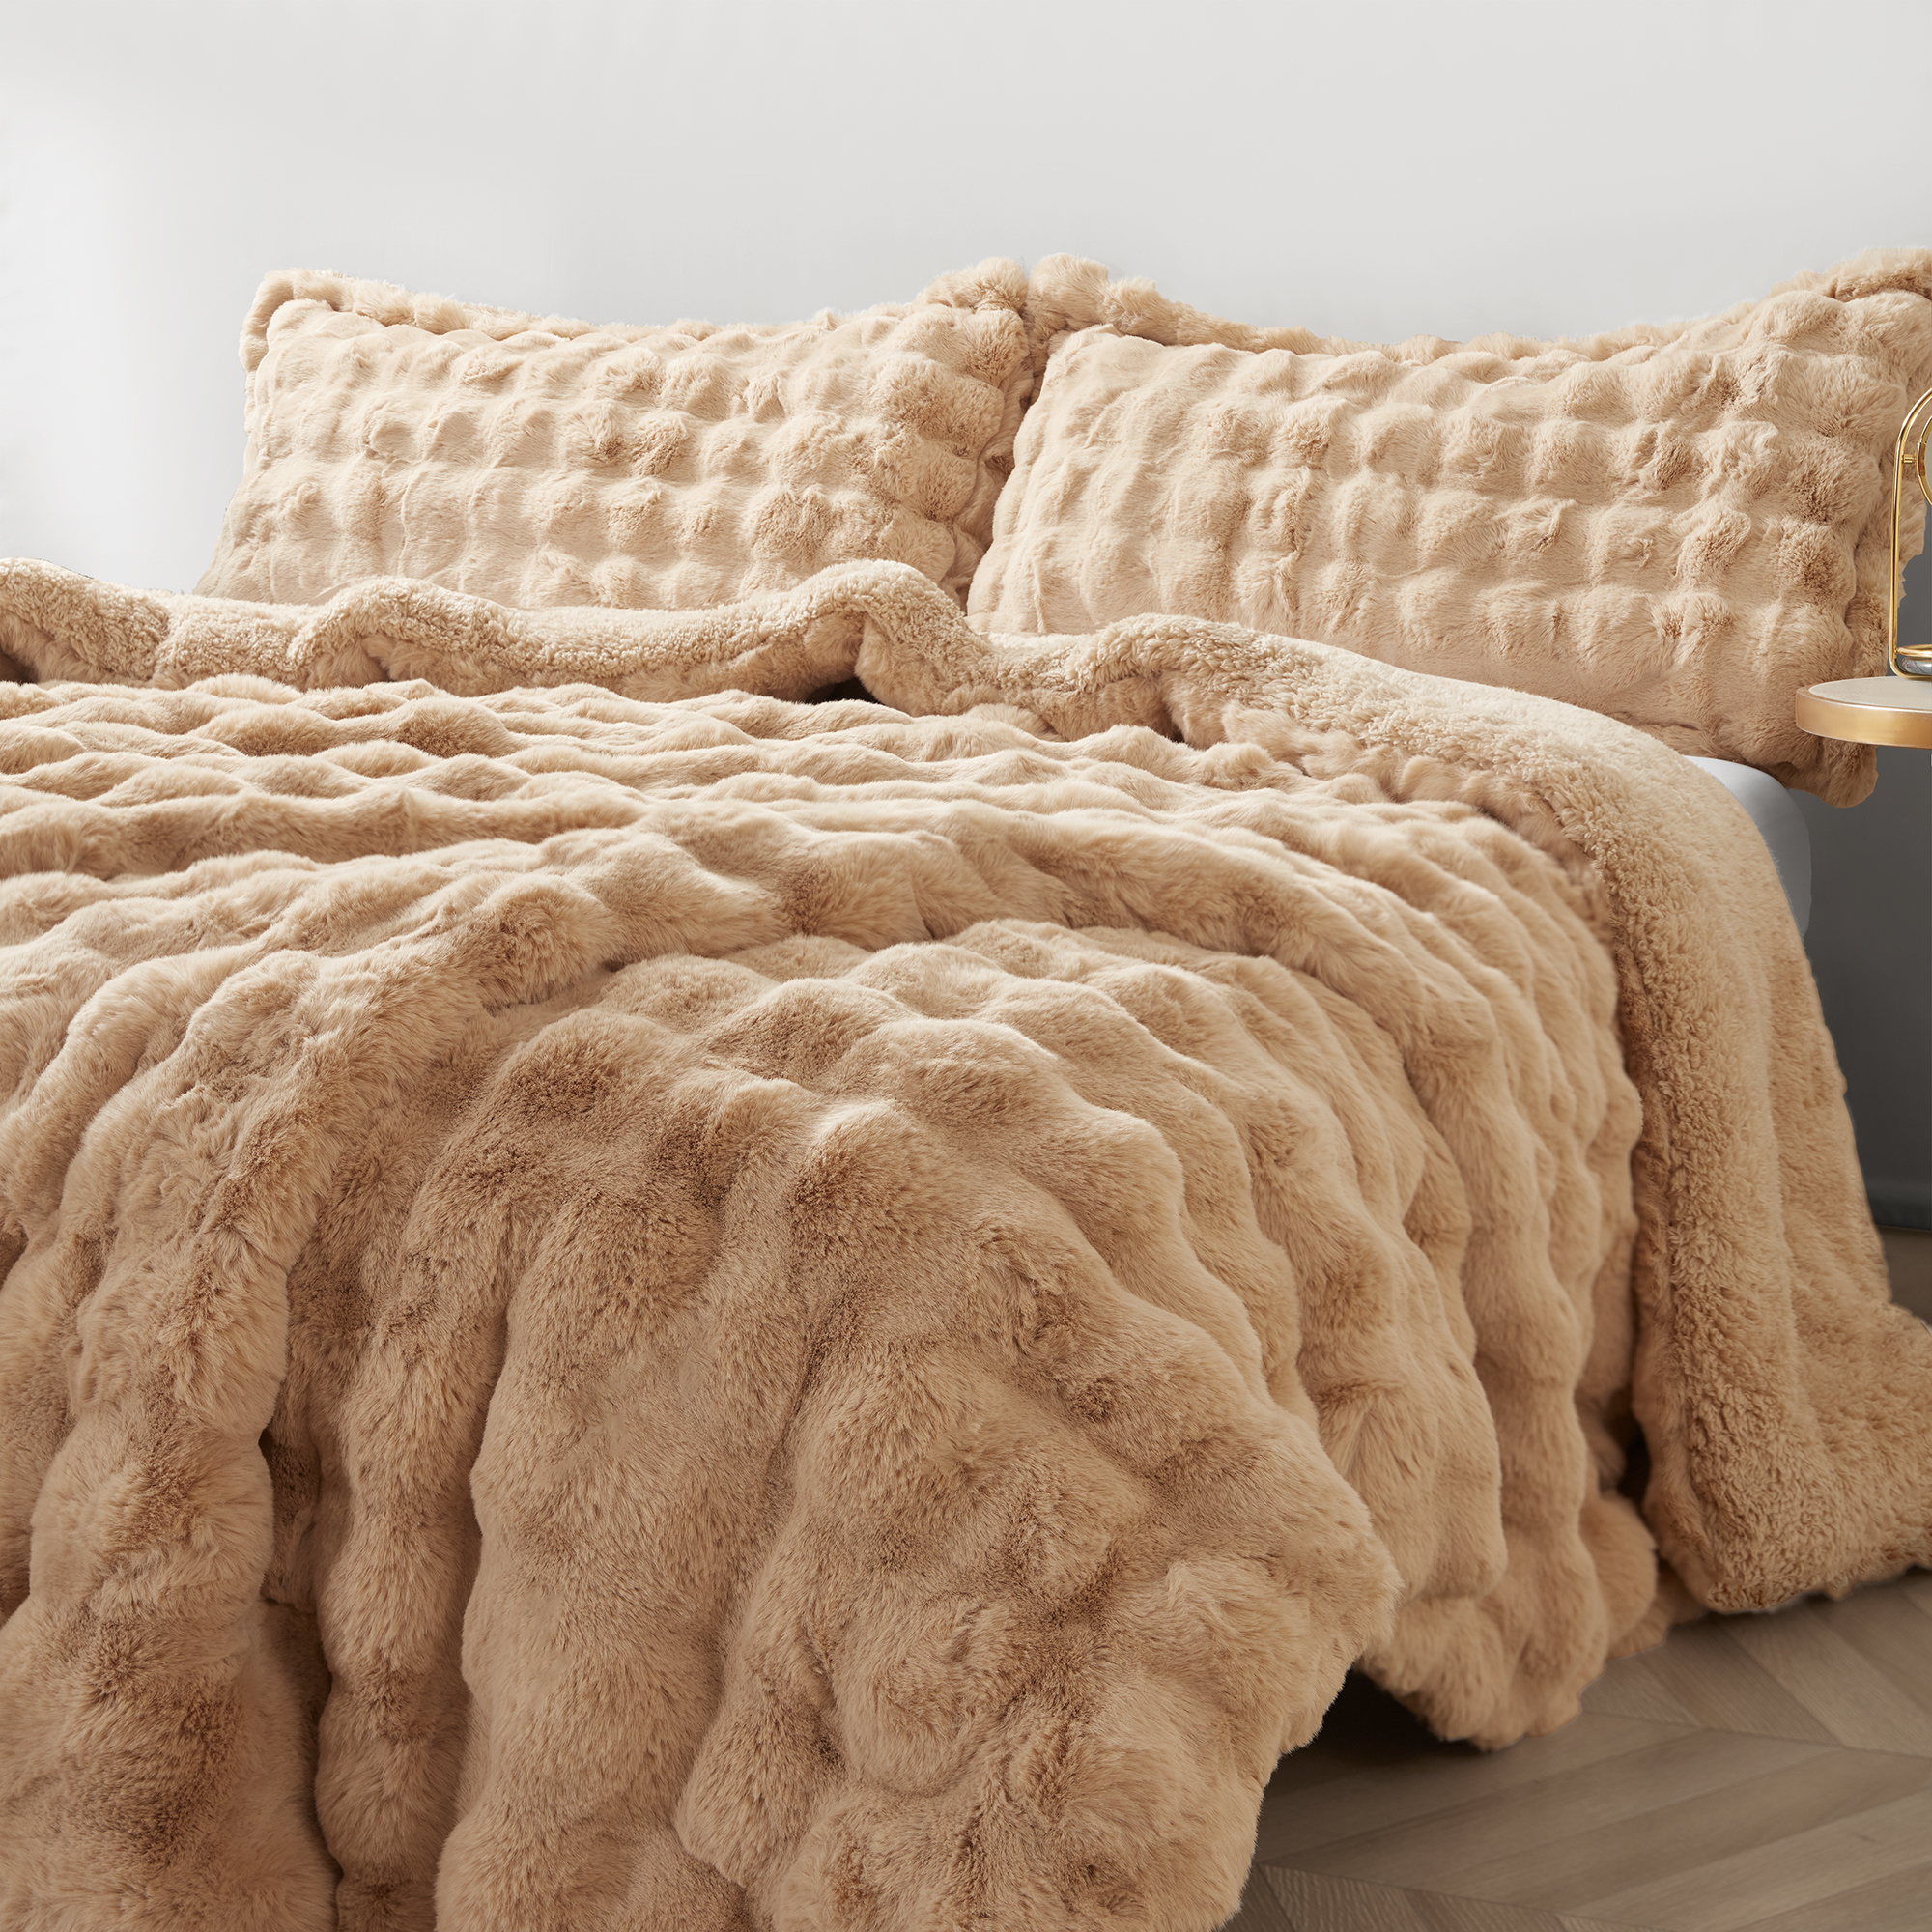 Snowball Chunky Bunny - Coma Inducer Oversized Comforter - Holland Lop Tan